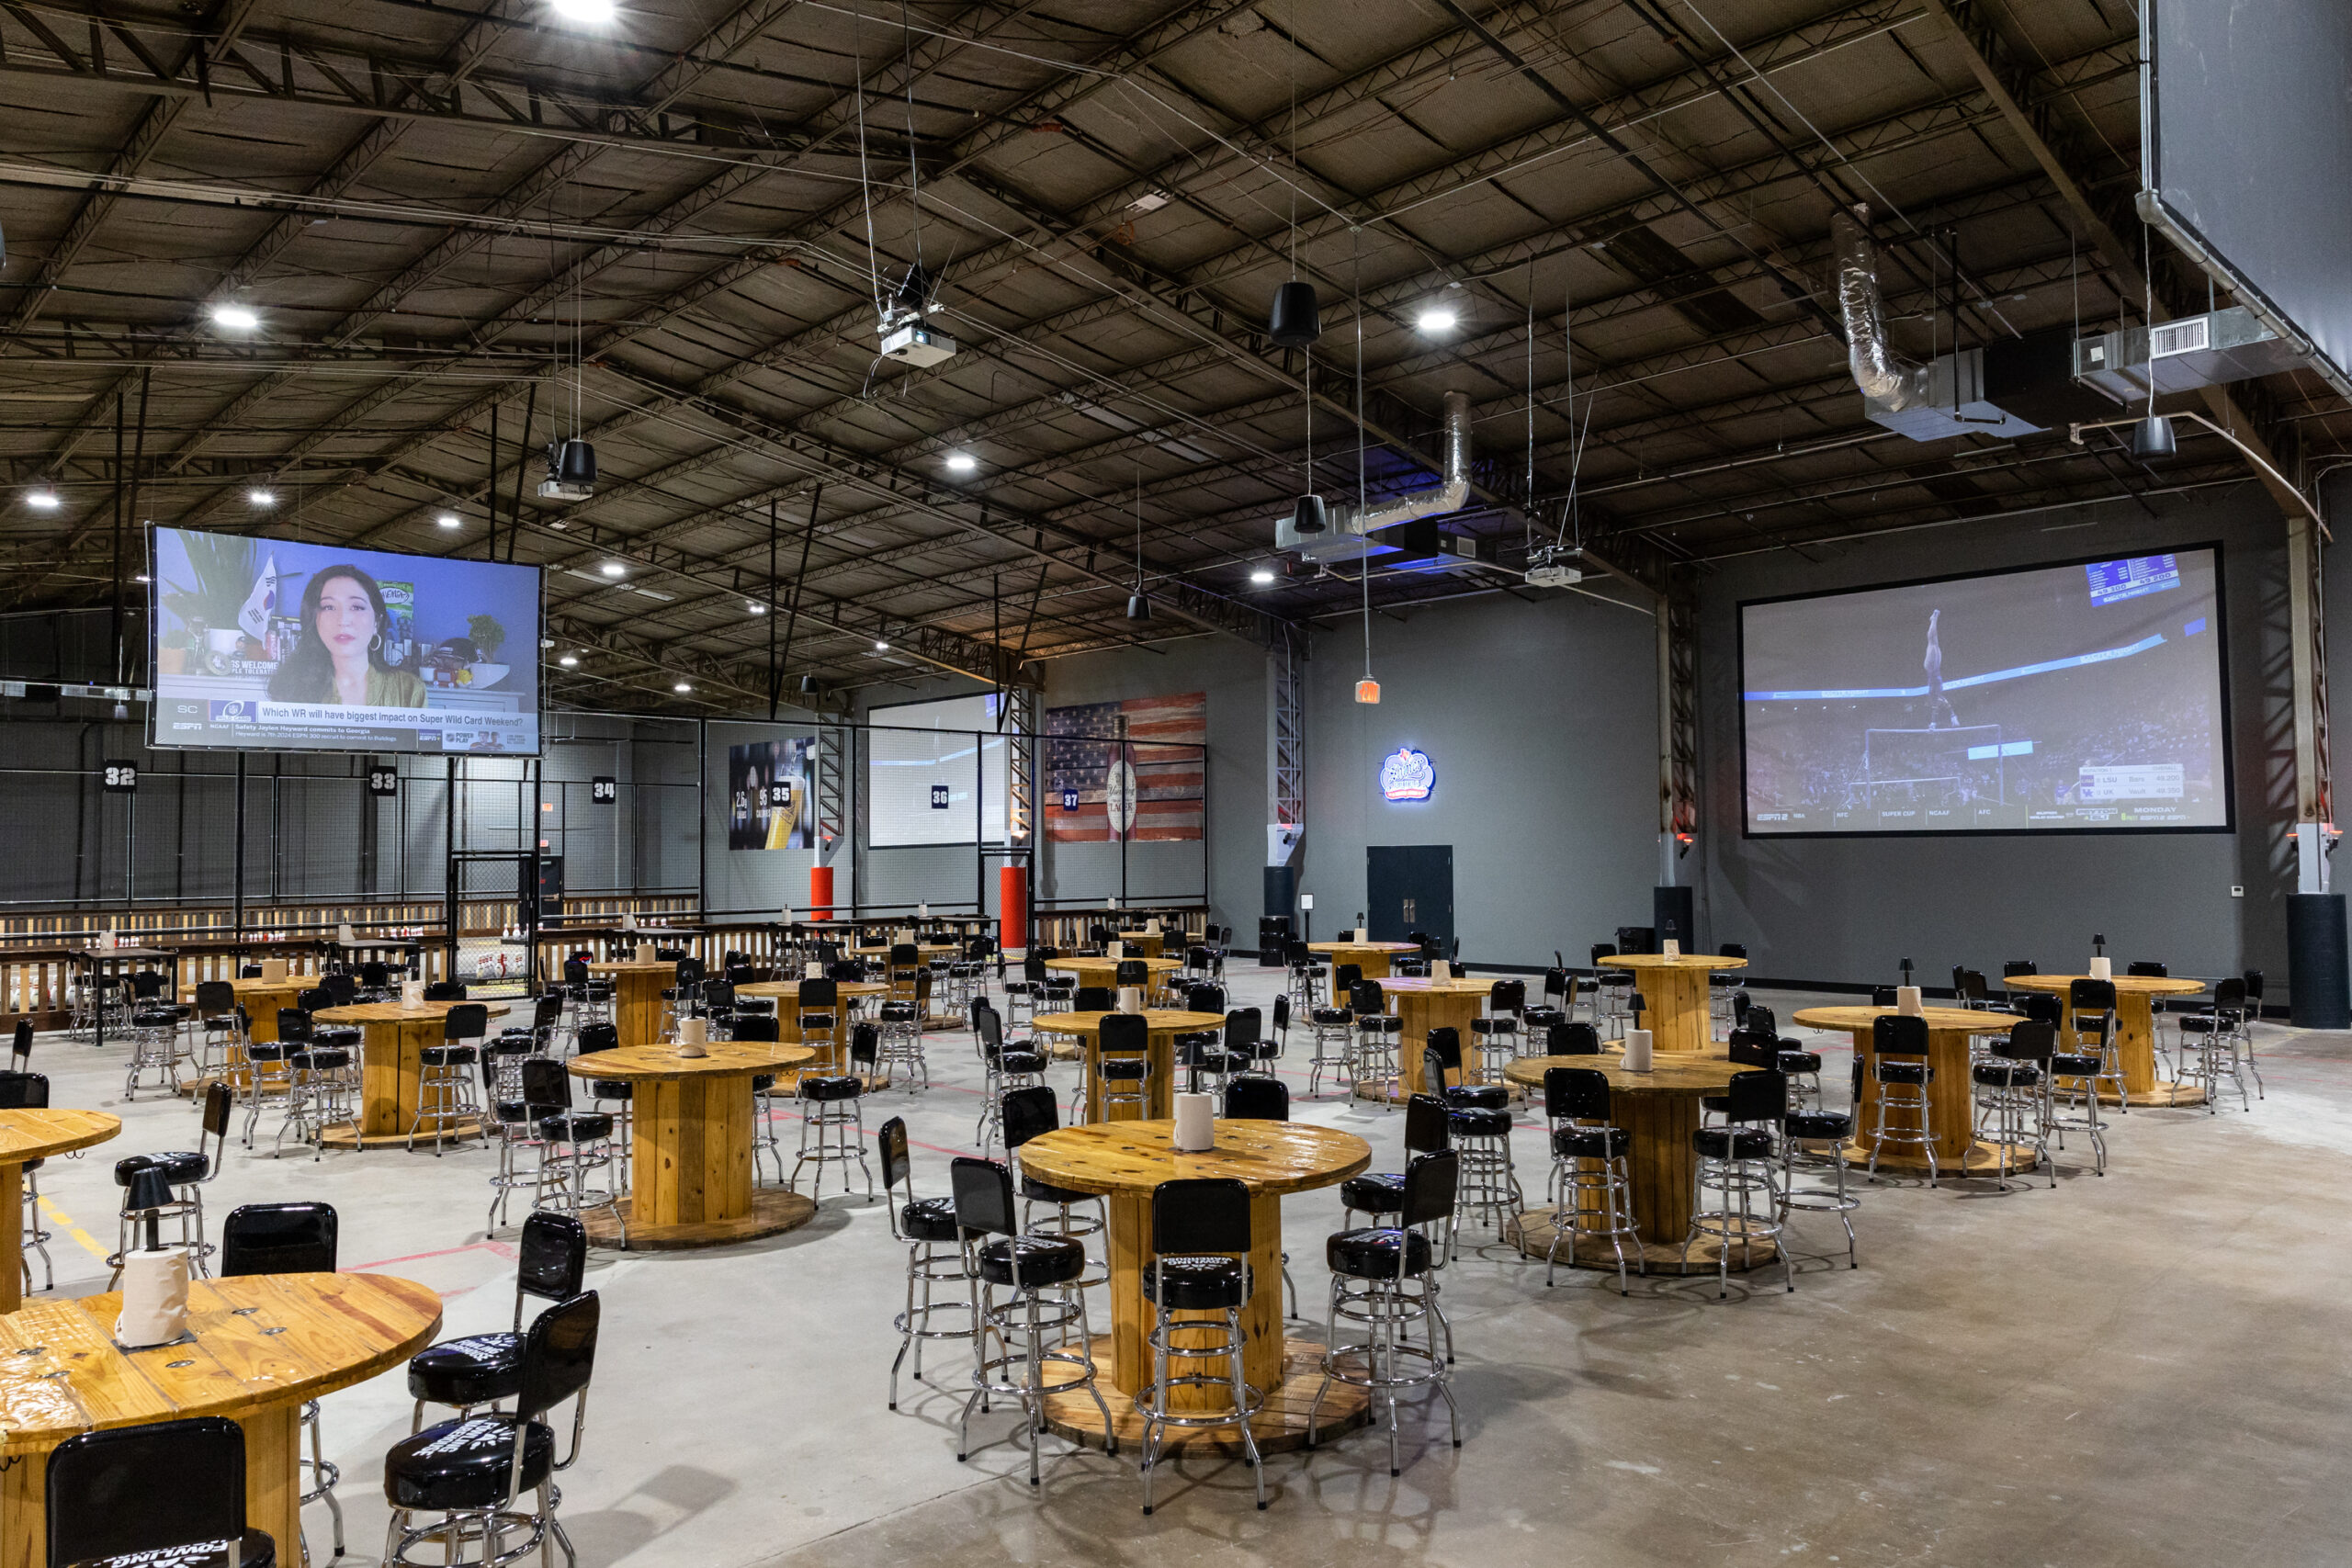 Fowling Warehouse - restaurant space